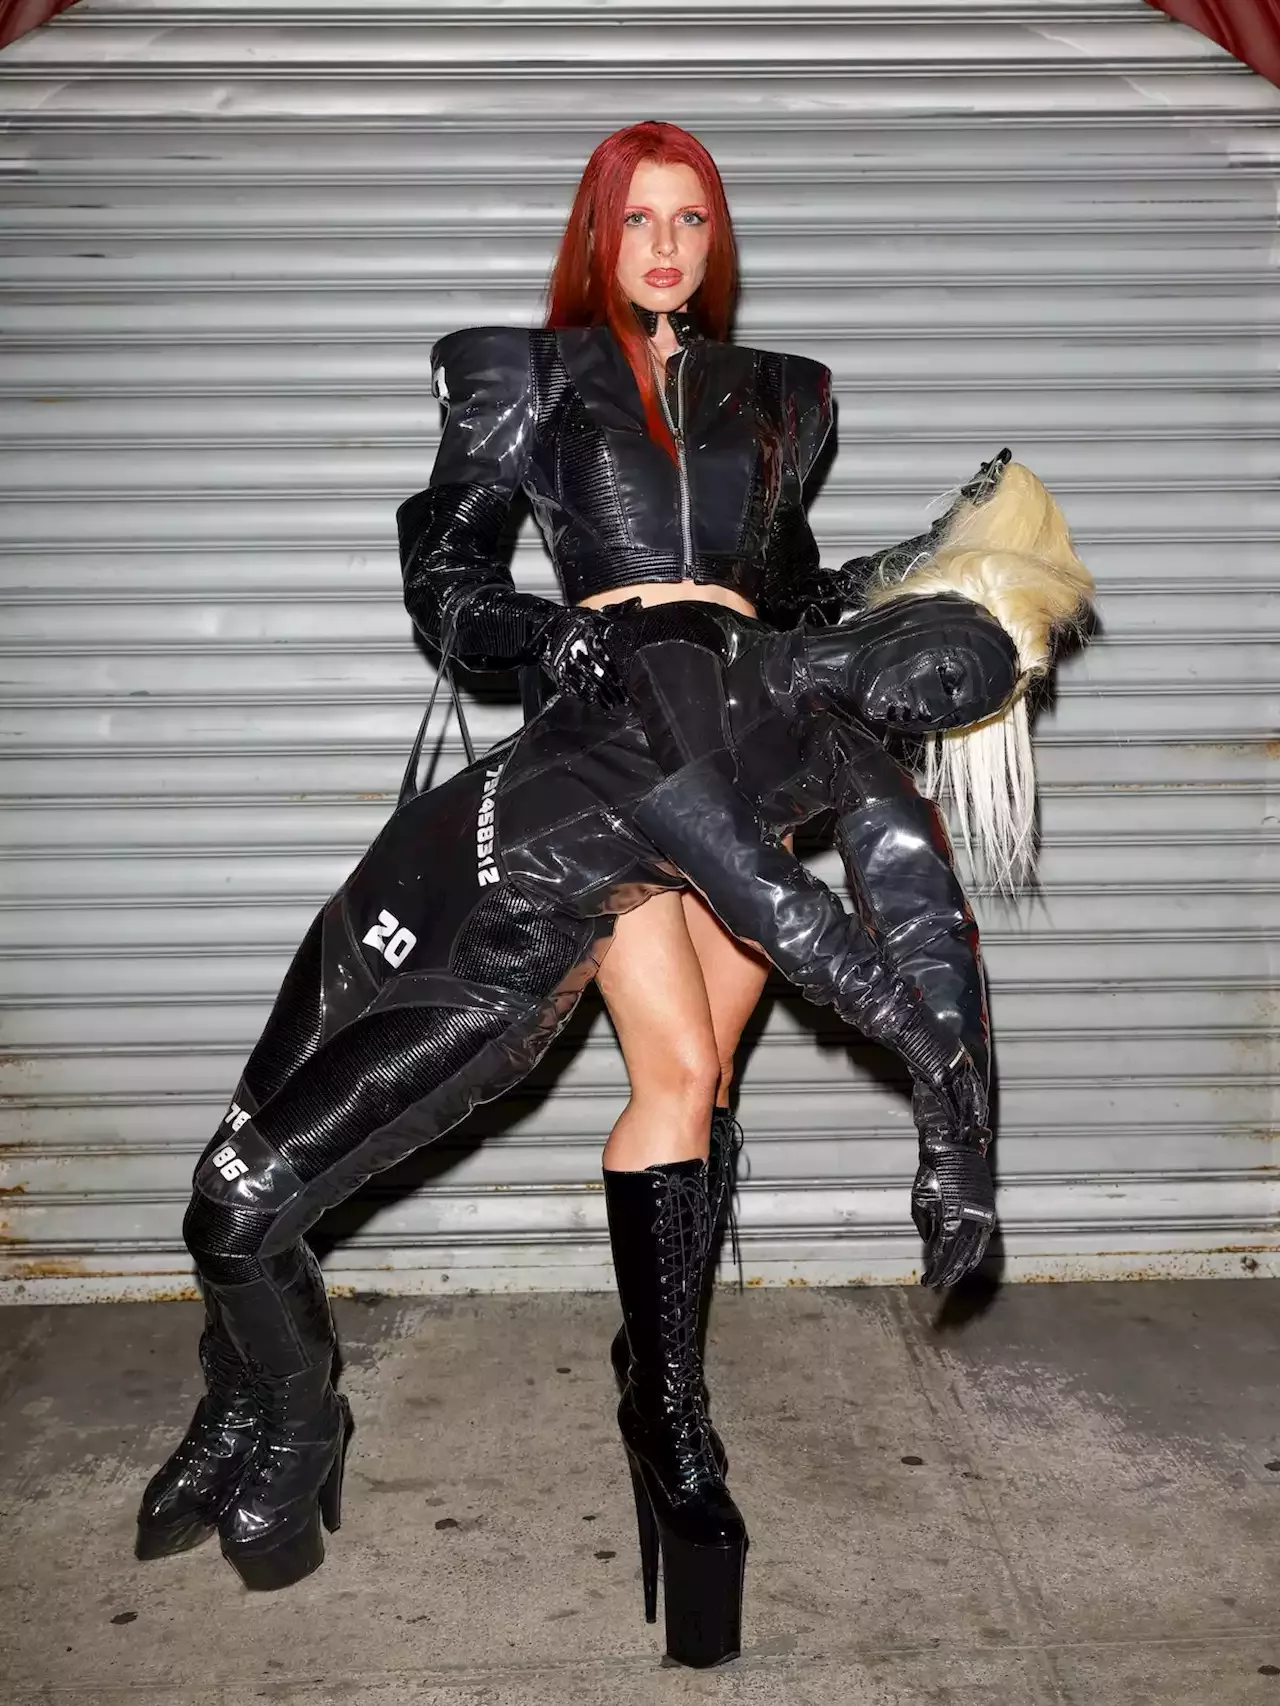 Julia Fox's Latest Leather Look Includes Assless Chaps and a Horse Tail